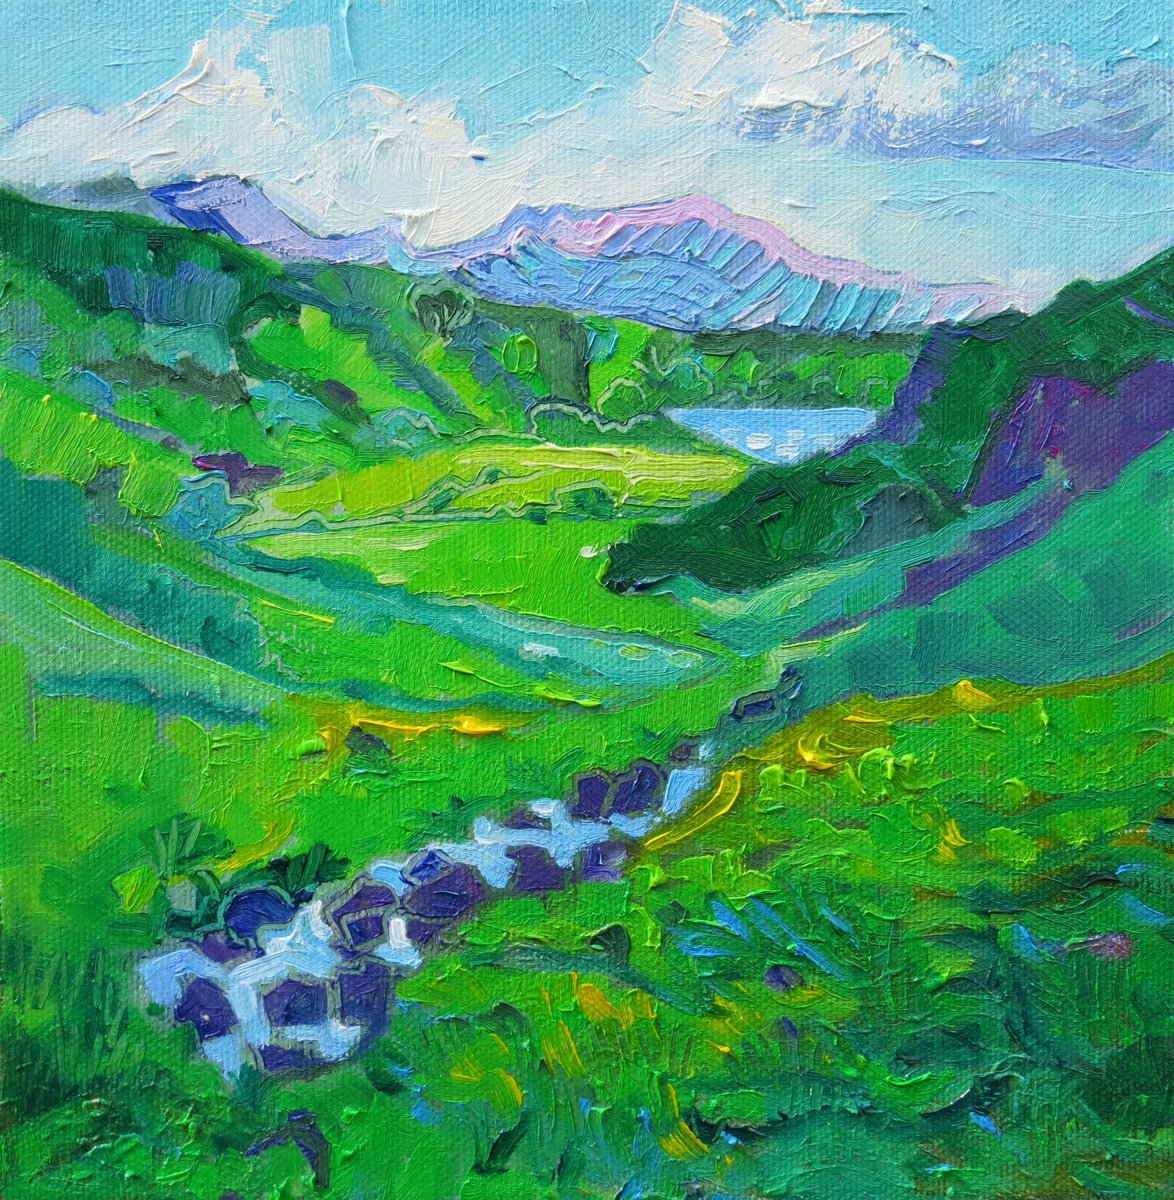 Mountain Stream, Lake District Landscape by Mary Kemp